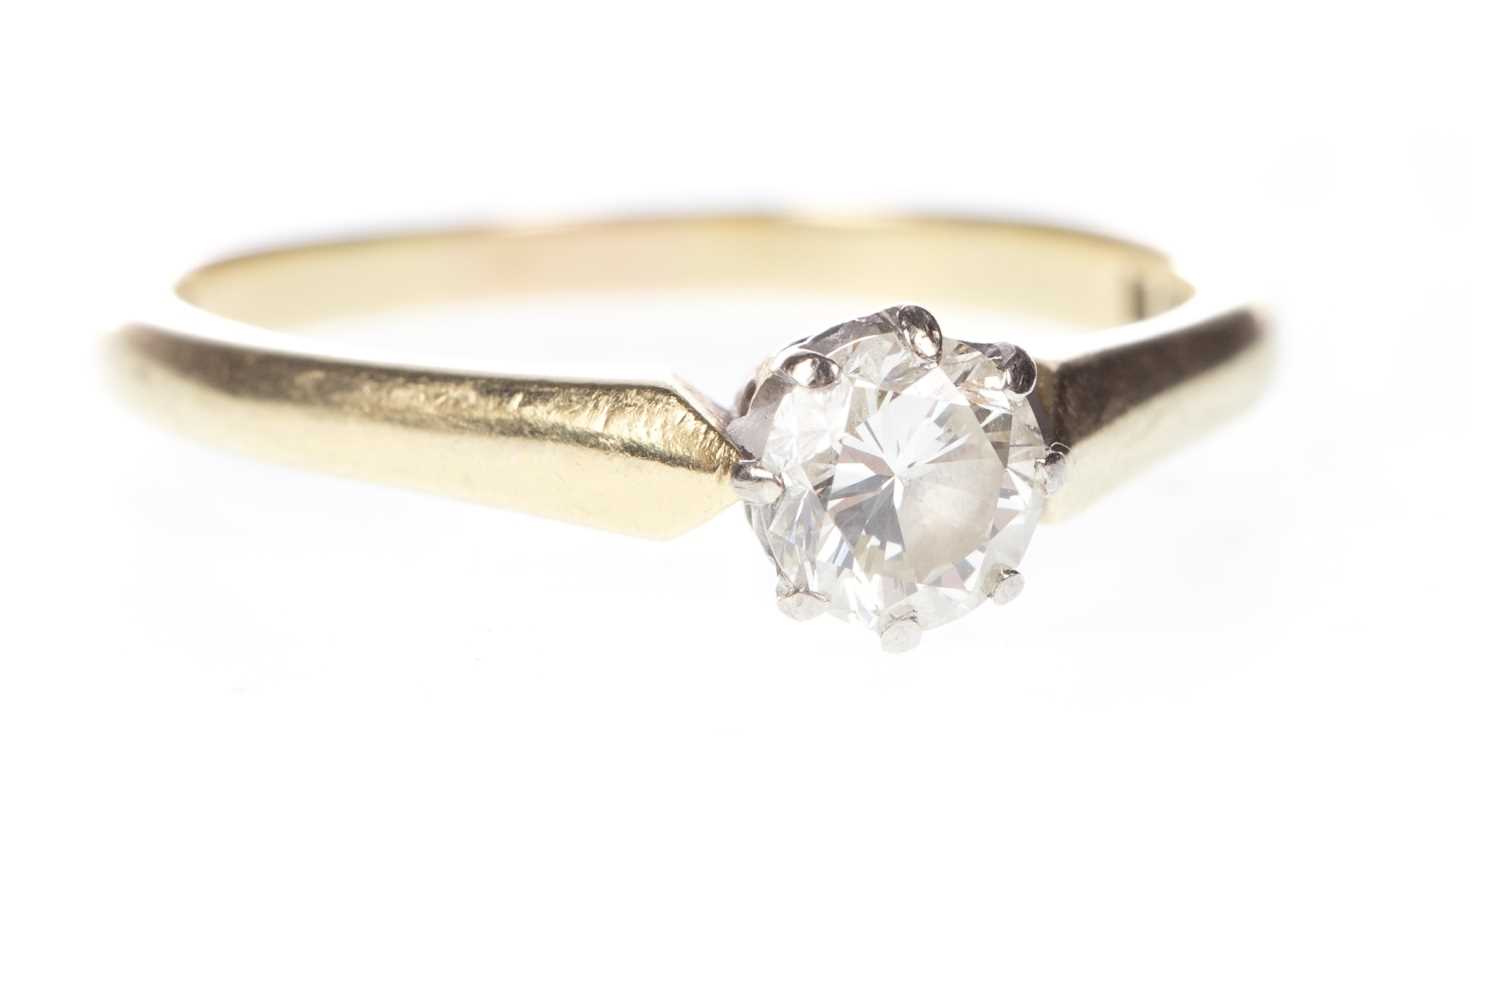 Lot 56 - A DIAMOND SOLITAIRE RING